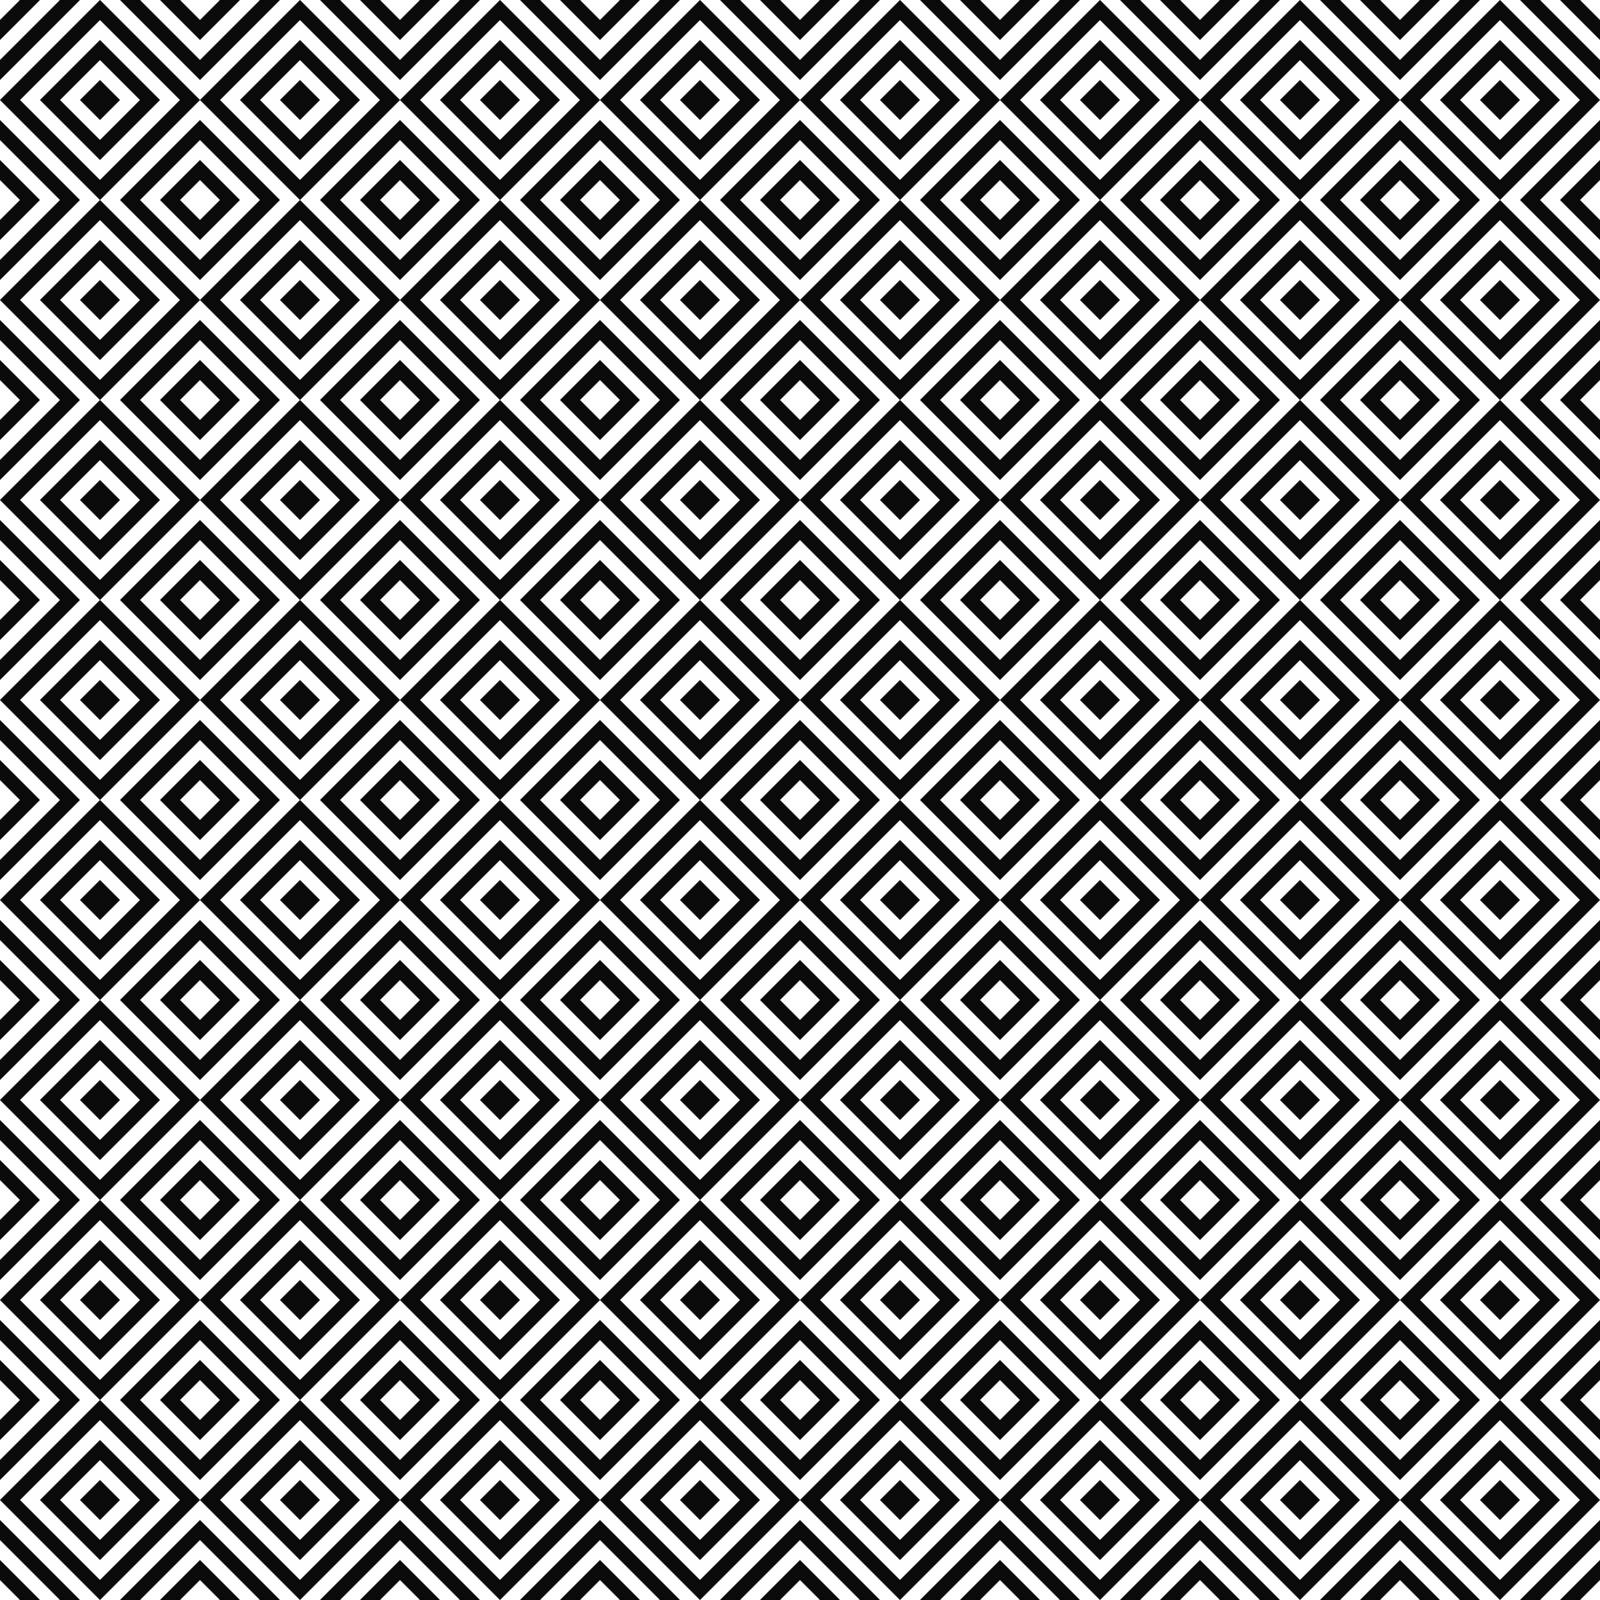 Repeating black and white square pattern design